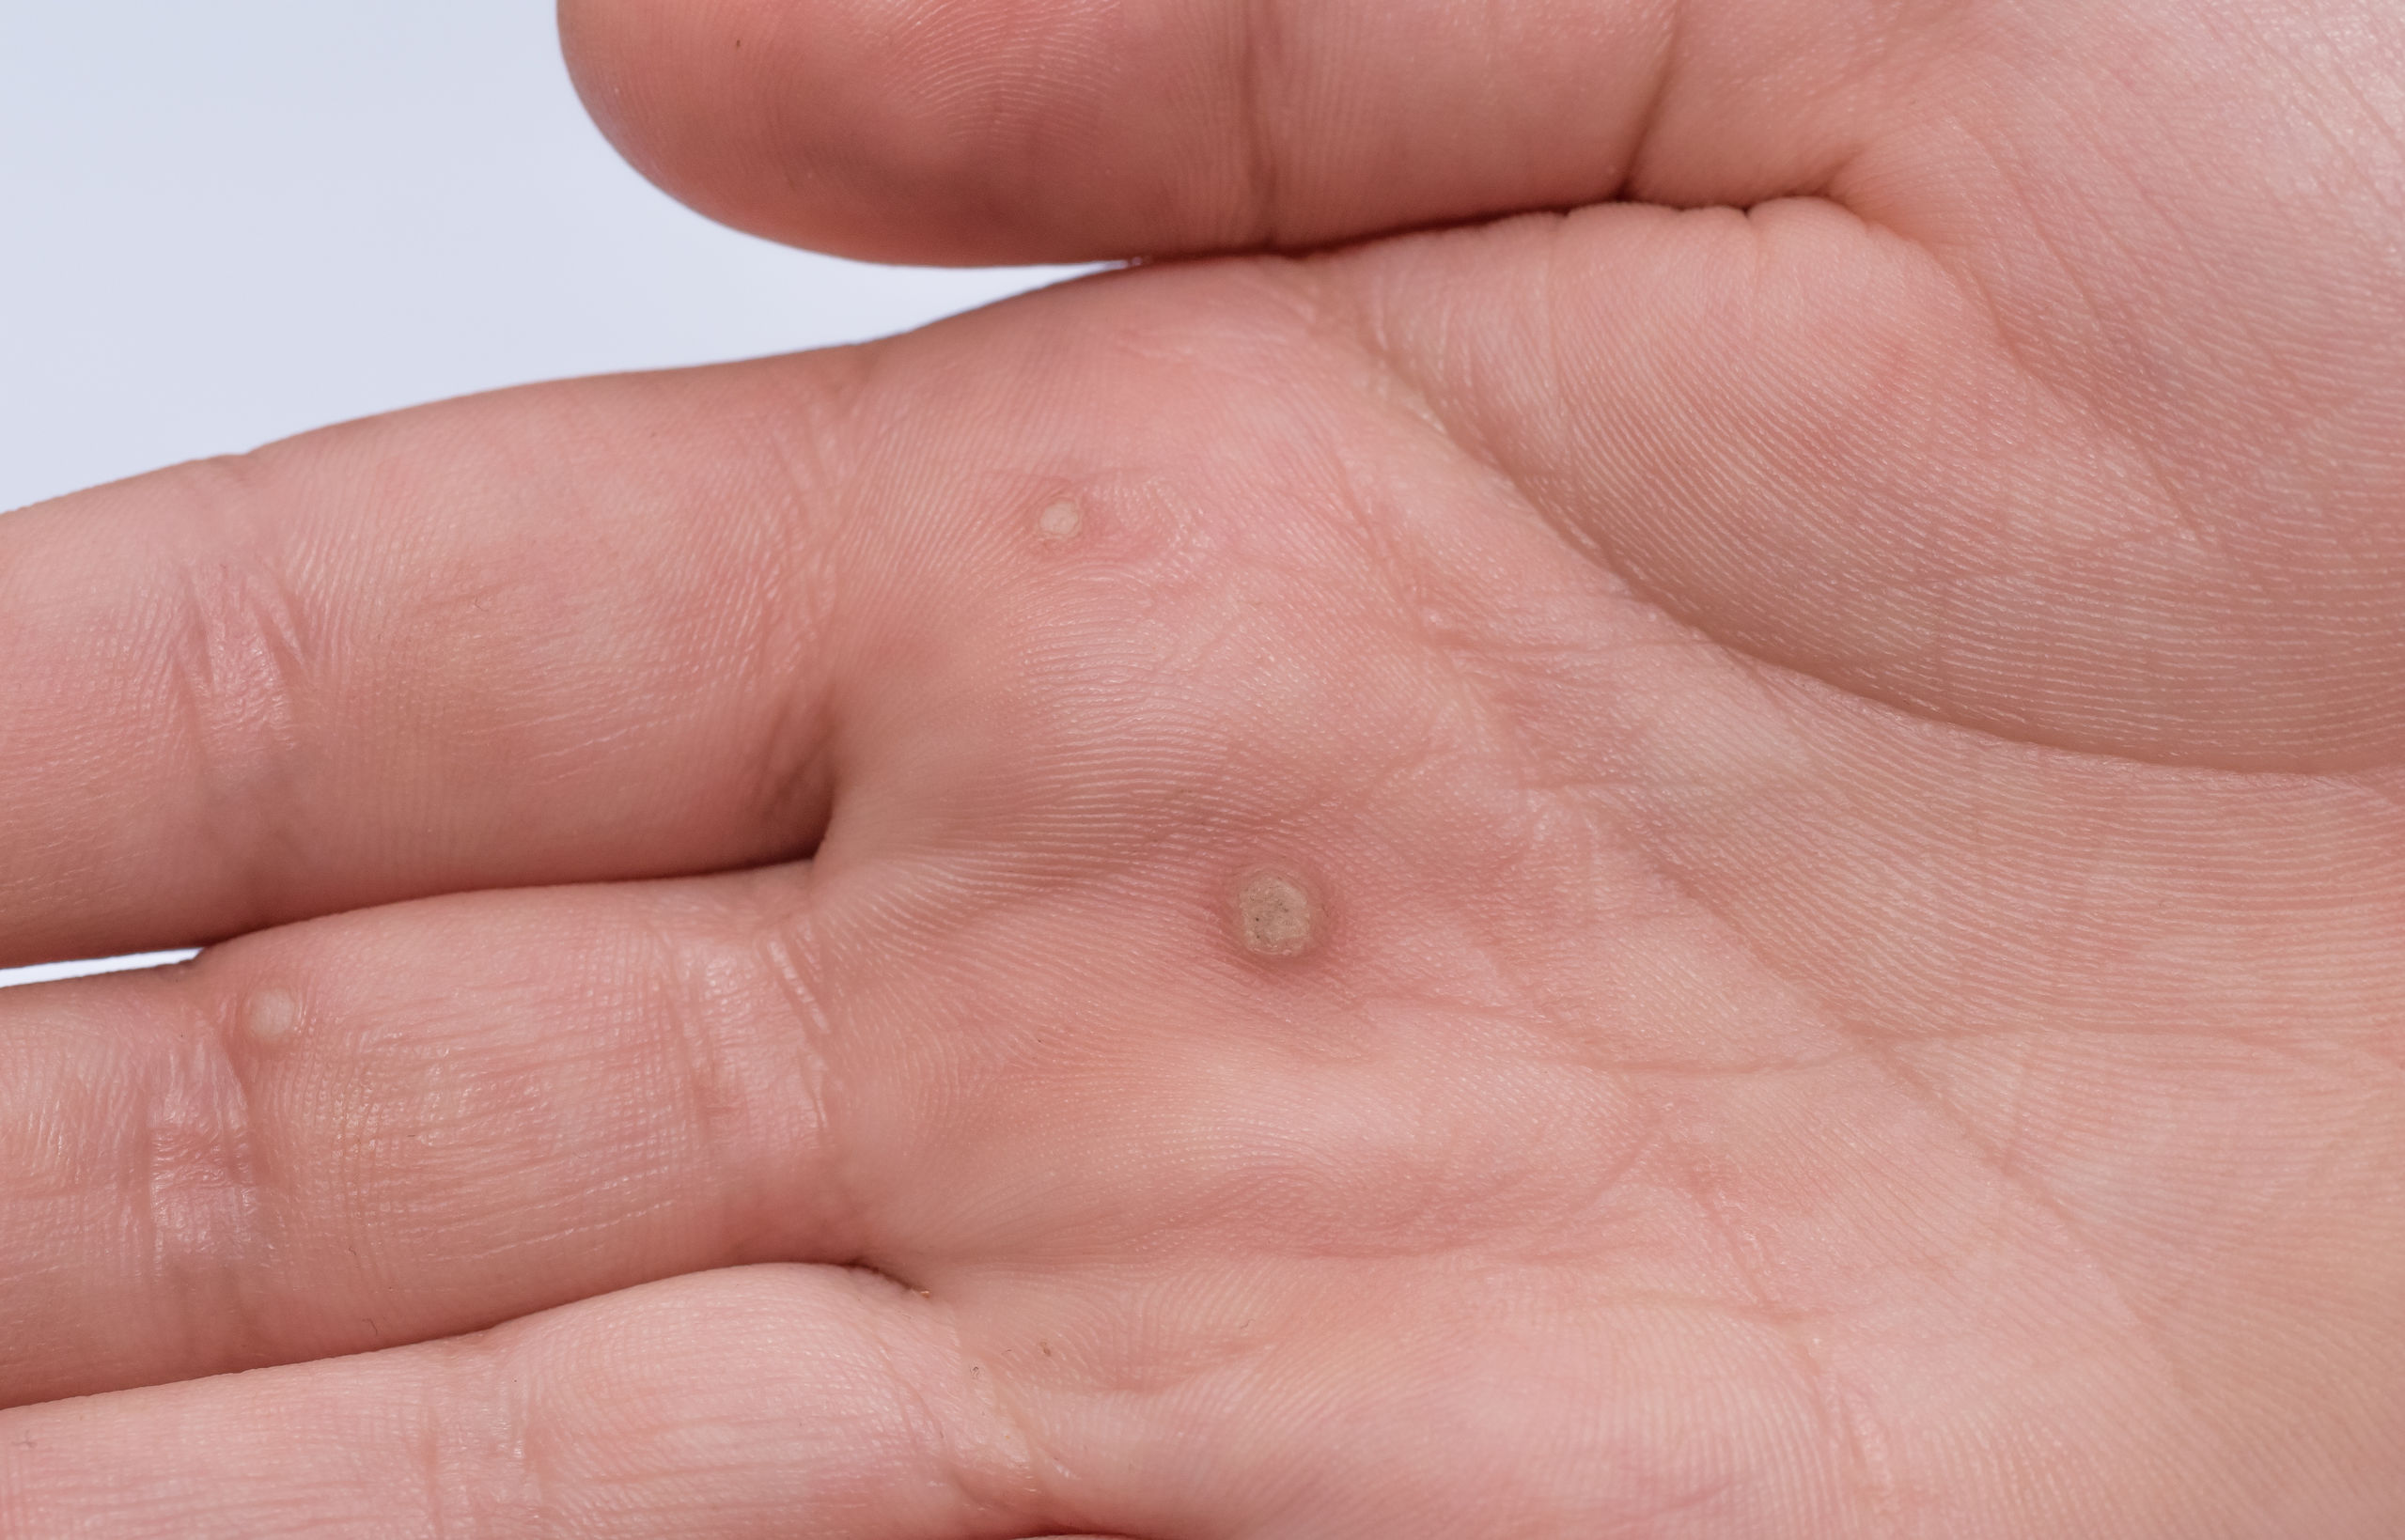 Warts on hands why, Can warts on hands be painful Reteta detoxifiere colon